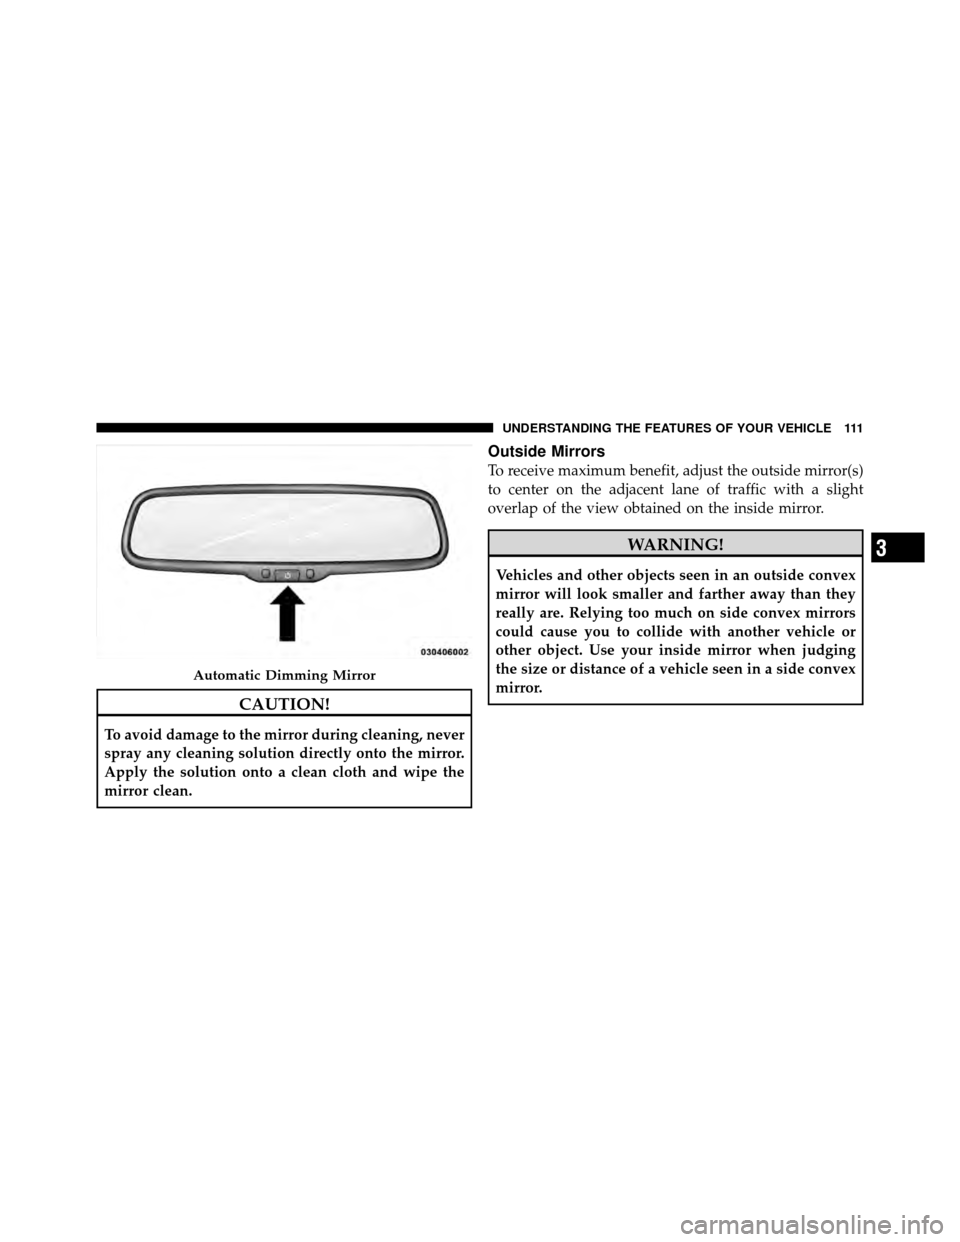 DODGE GRAND CARAVAN 2010 5.G Owners Manual 
CAUTION!
To avoid damage to the mirror during cleaning, never
spray any cleaning solution directly onto the mirror.
Apply the solution onto a clean cloth and wipe the
mirror clean.
Outside Mirrors
To